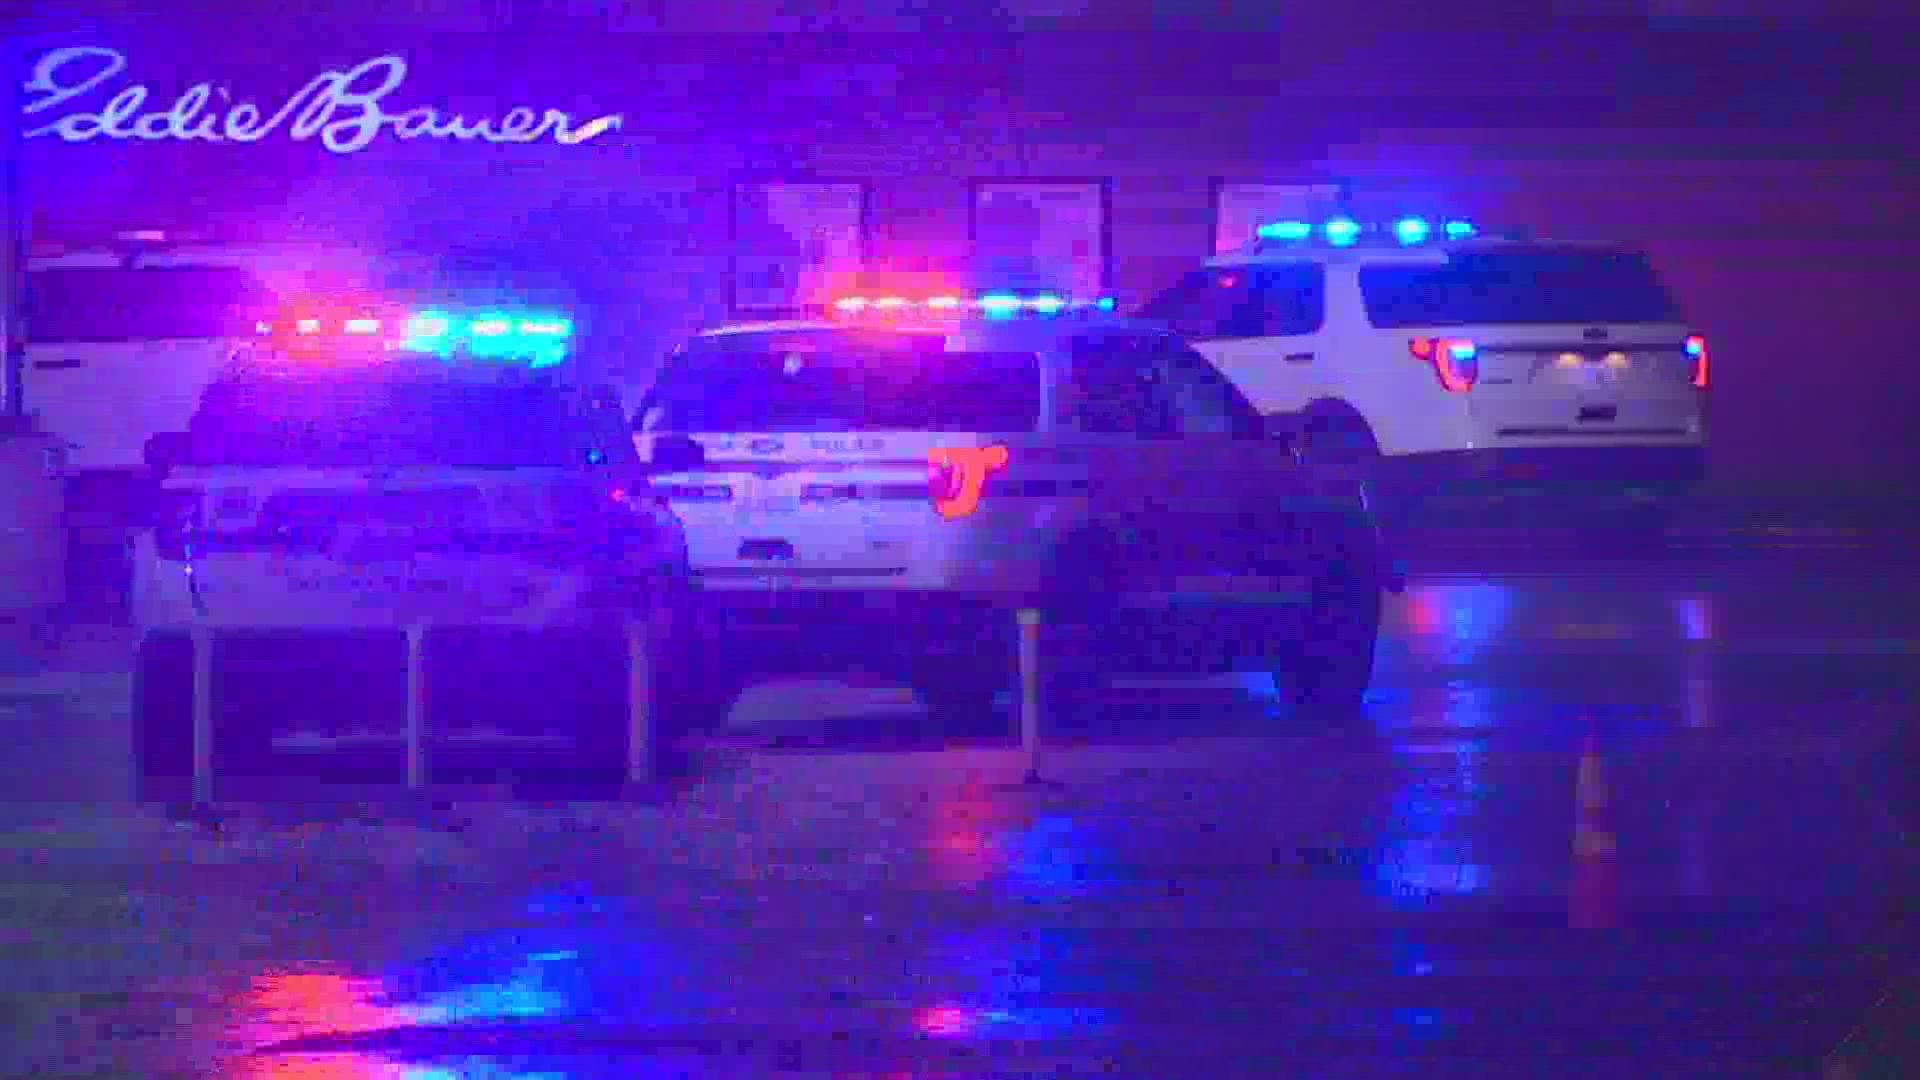 Police said one person was shot at Tacoma Mall just after 7 p.m. Friday. There are no suspects in custody.